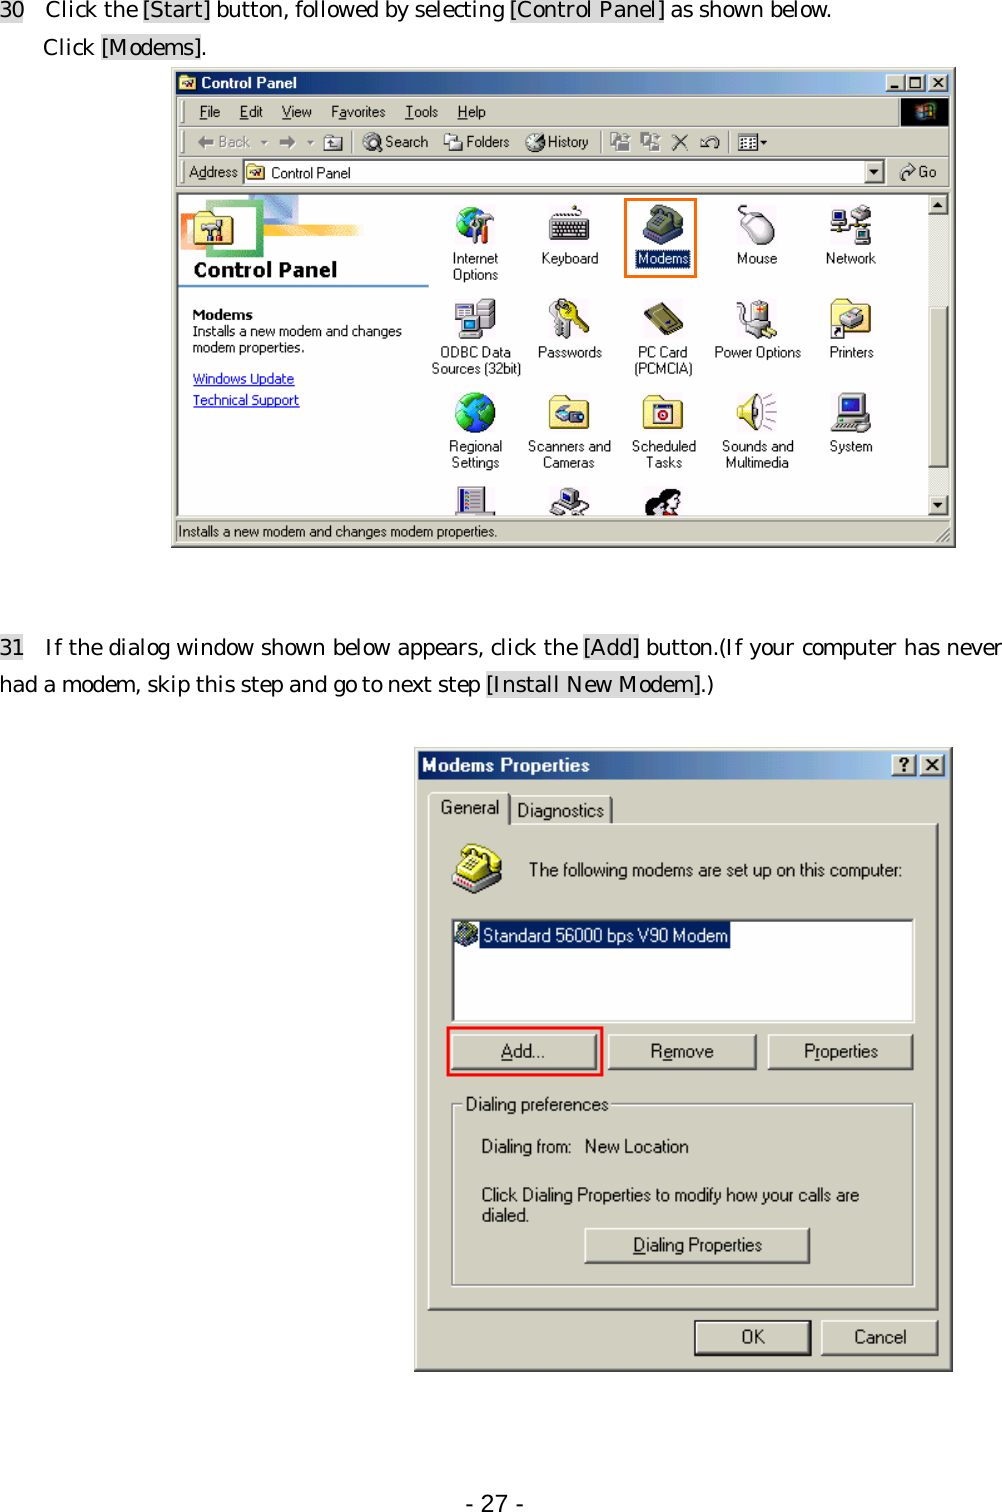 30    Click the [Start] button, followed by selecting [Control Panel] as shown below. Click [Modems].                31   If the dialog window shown below appears, click the [Add] button.(If your computer has never had a modem, skip this step and go to next step [Install New Modem].)     - 27 -  